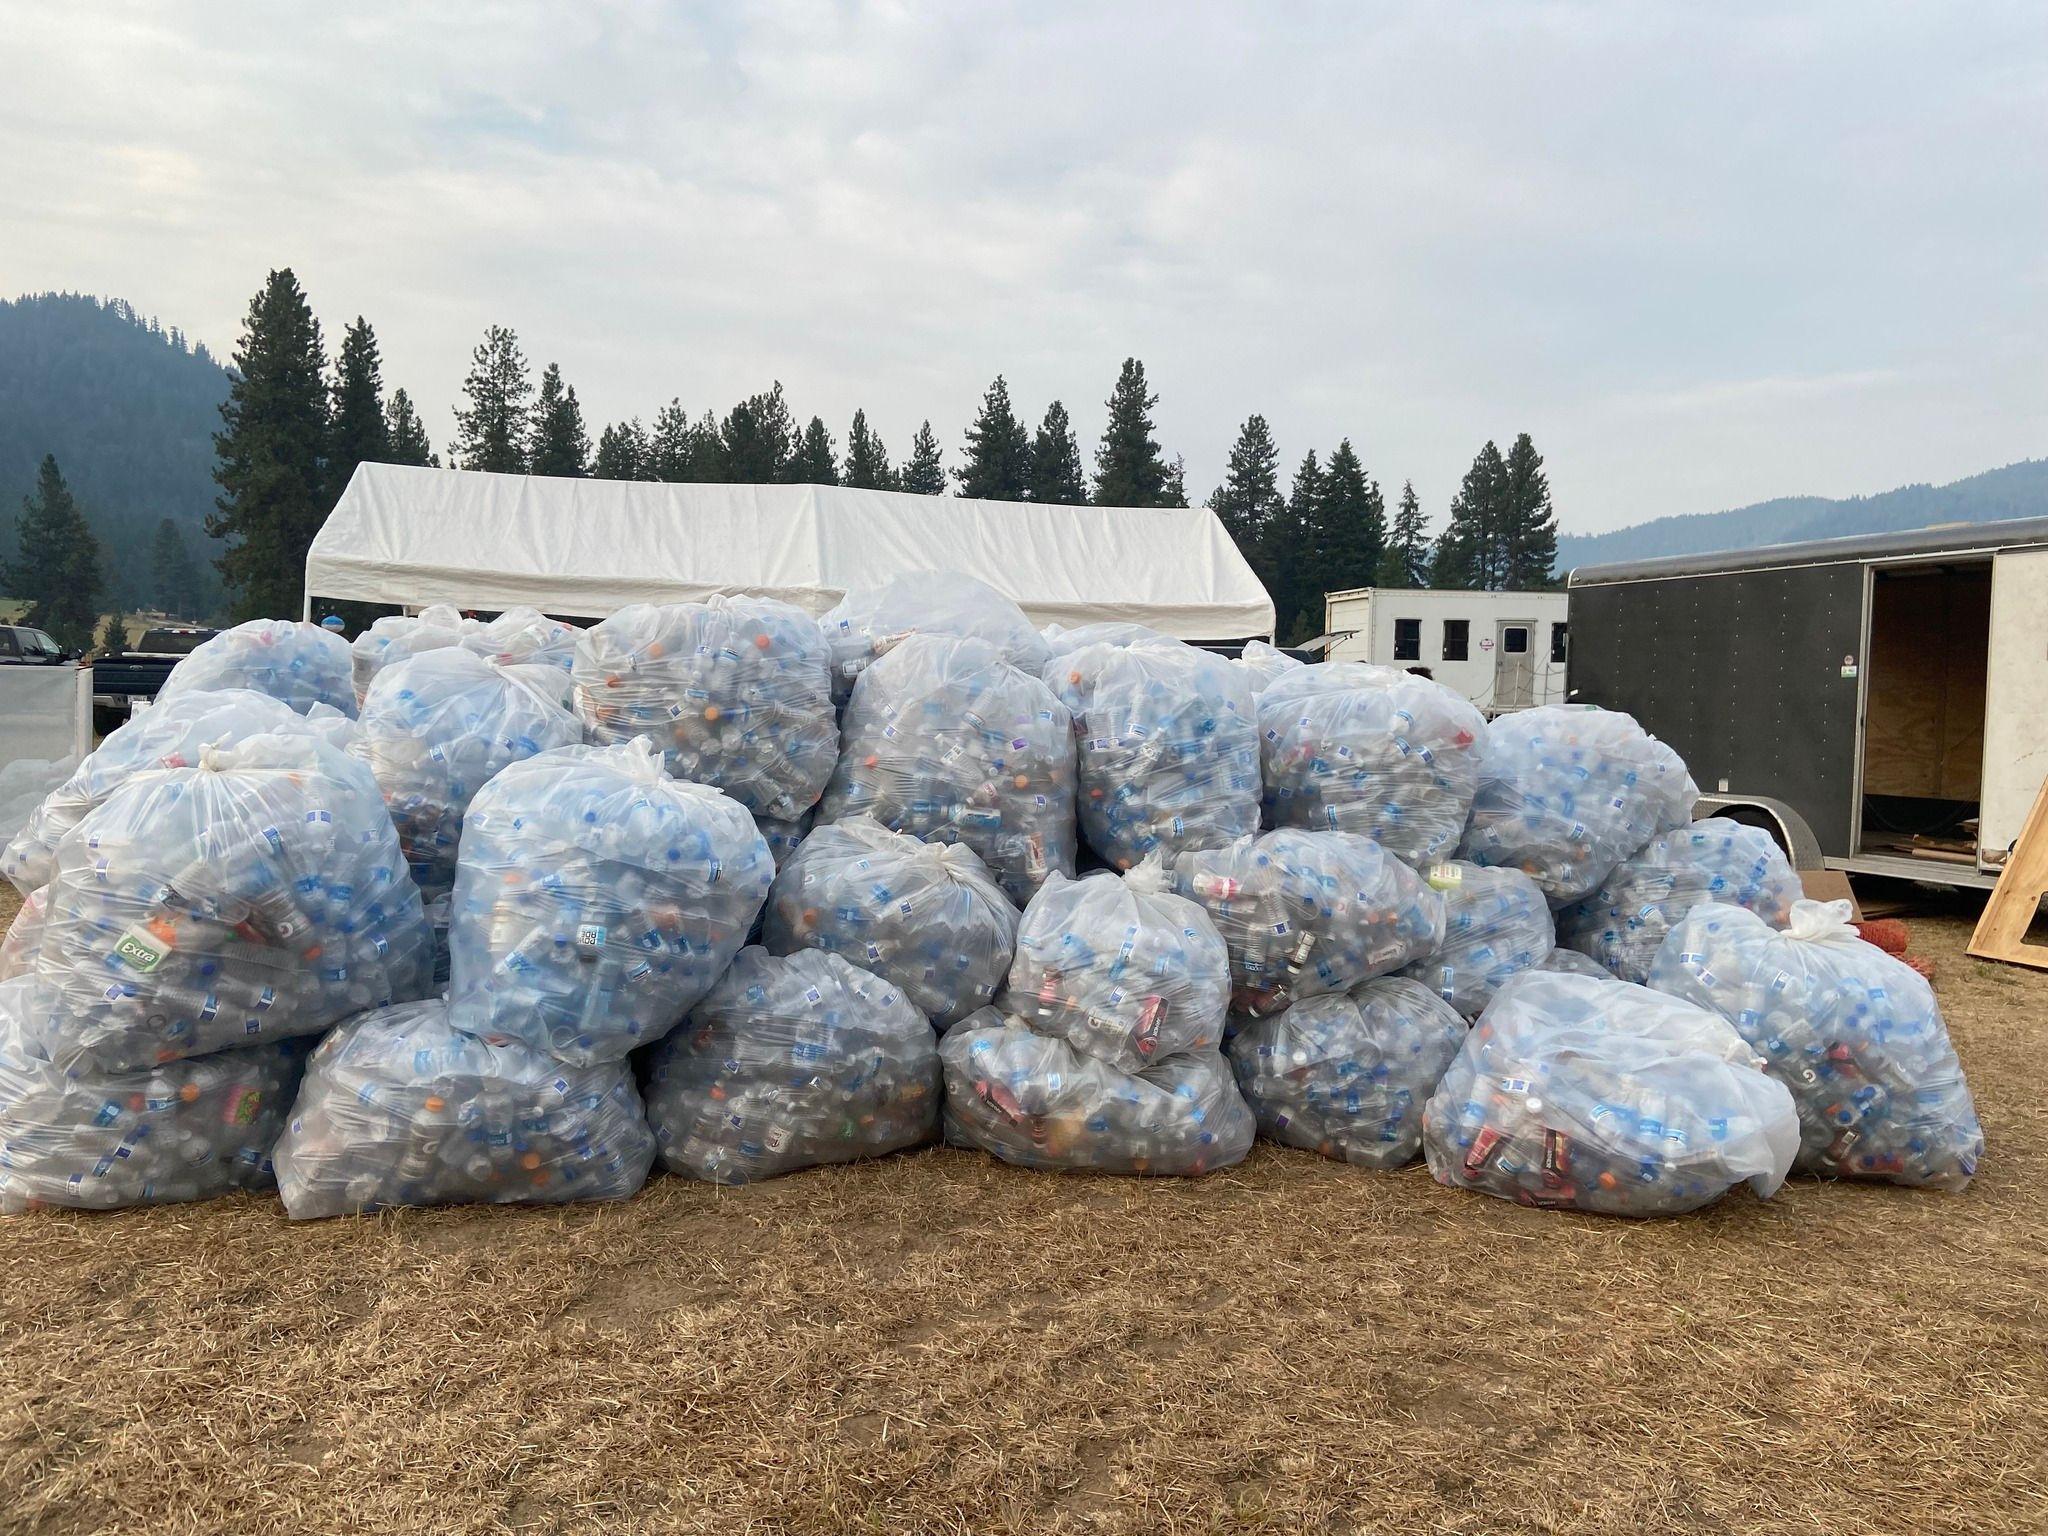 Recycle at White River Fire Camp